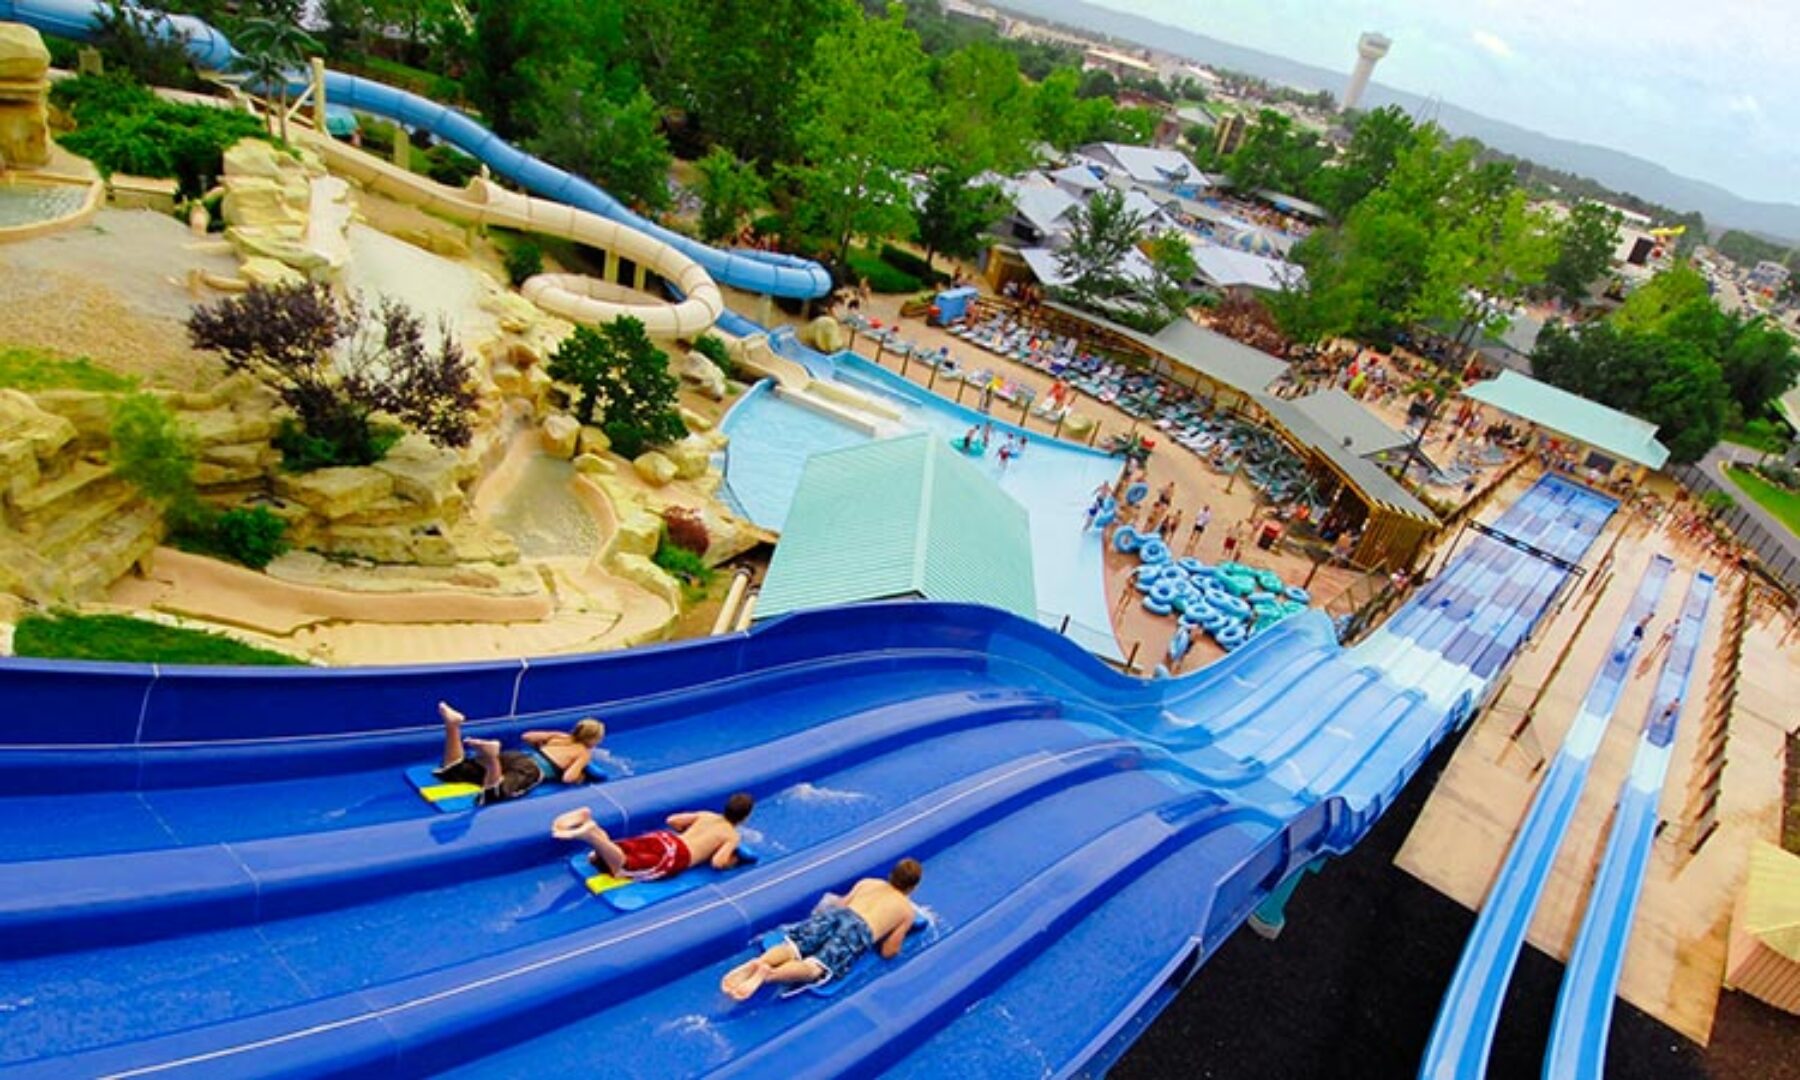 View of three lane water slide with three young people riding yellow and blue surfing mats down the slide, tube slides and swimming pools in the distance of a medium sized midwest town with a water tower in the background